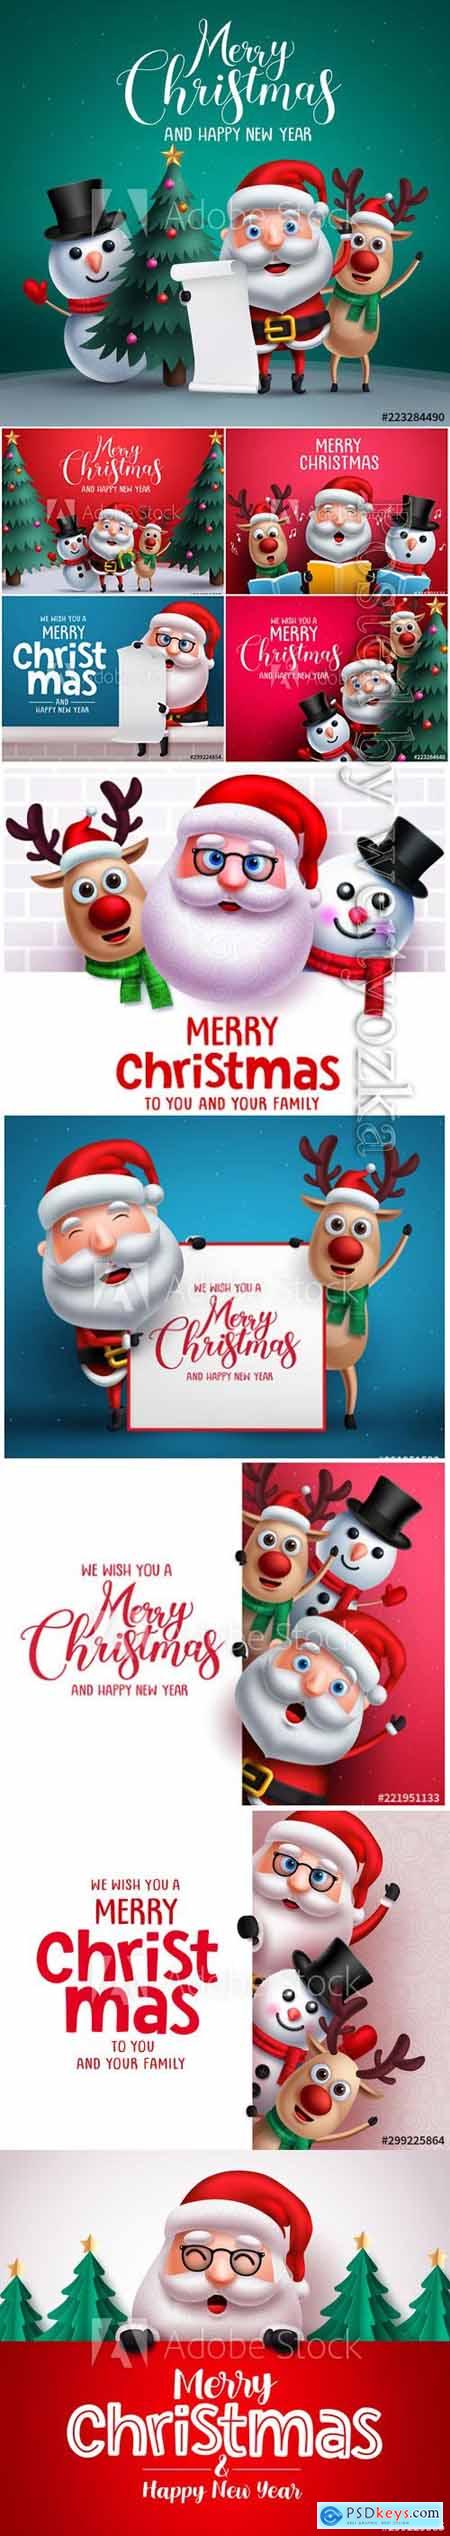 Merry christmas vector banner design with christmas character like santa claus, reindeer and snowman